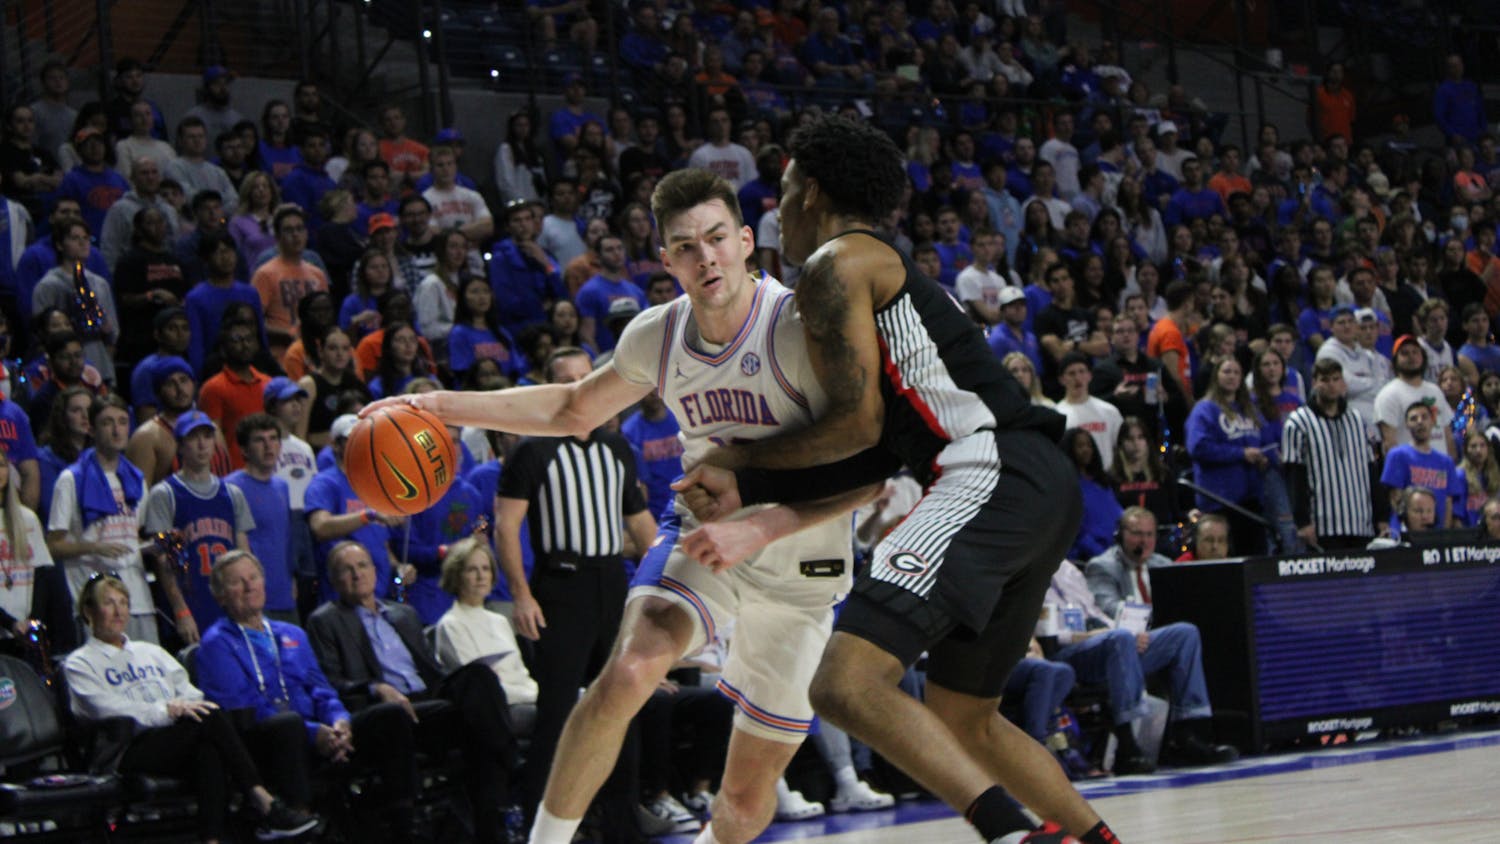 Florida forward Colin Castleton posts up a Georgia defender in the Gators' 82-75 victory over the Bulldogs Saturday, Jan. 7, 2023.